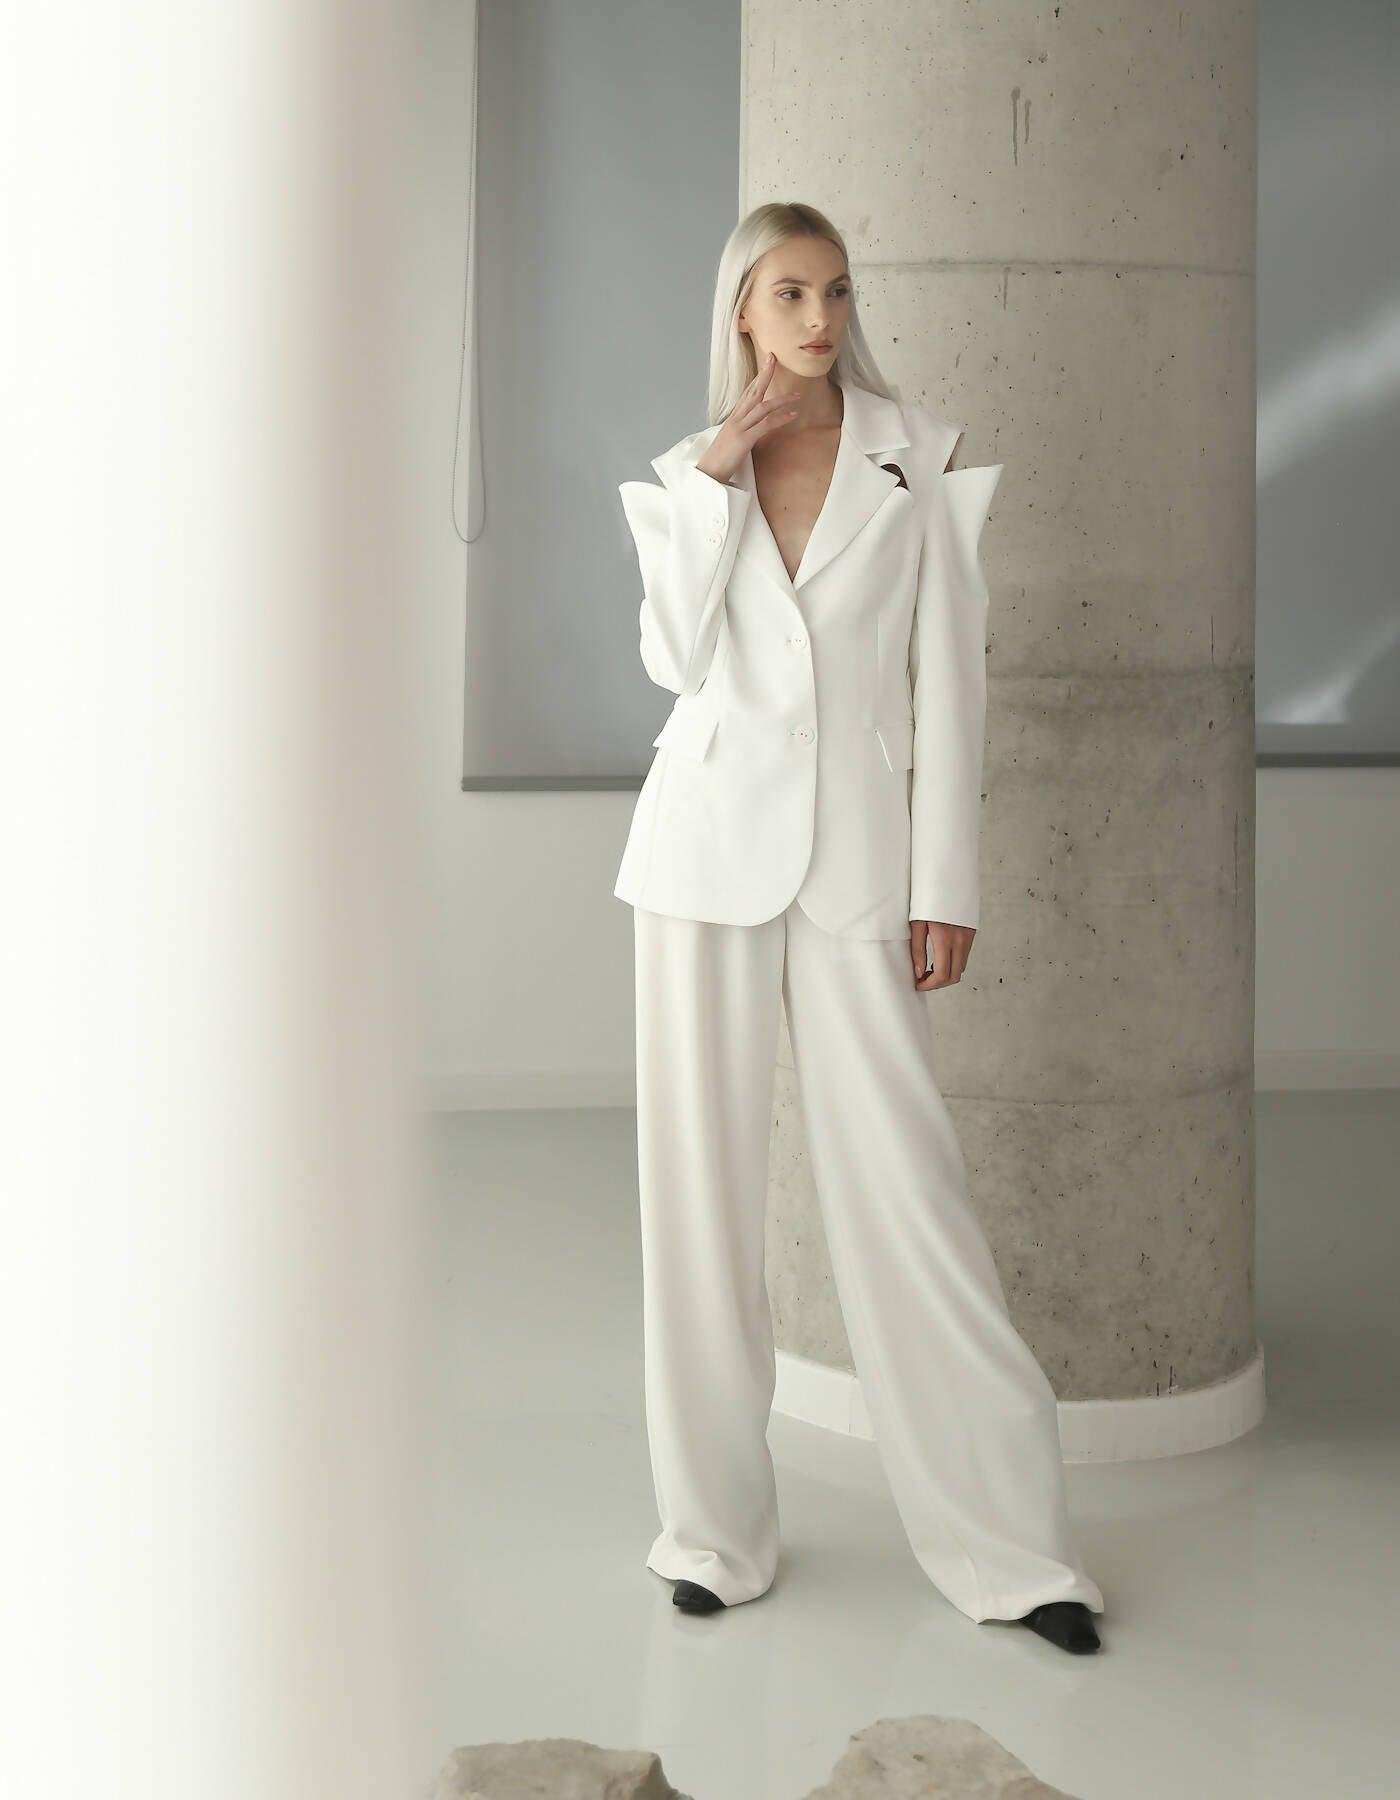 Makeda Pantsuit with Cut Outs by MAET STUDIO